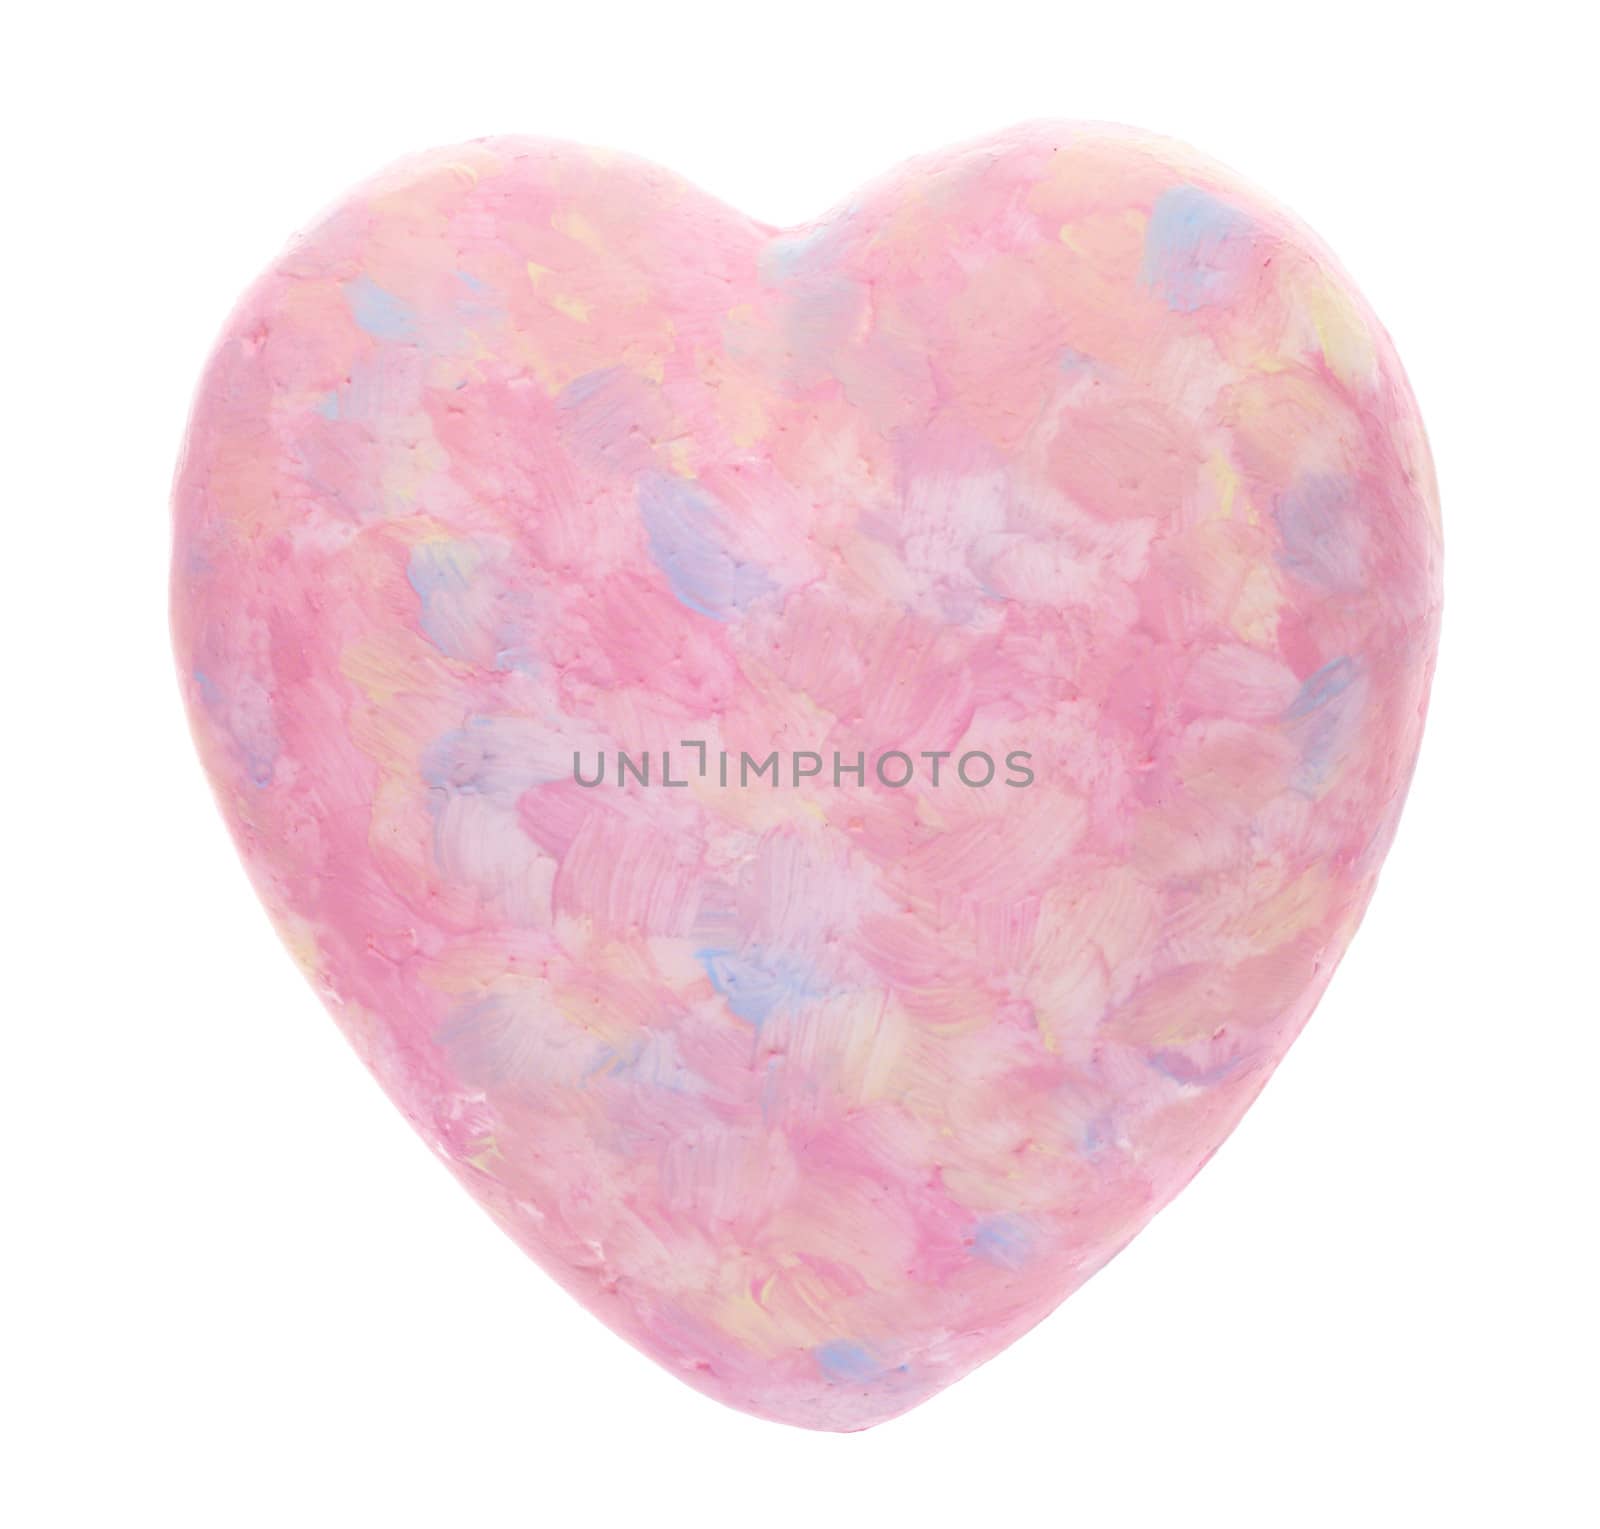 Pink heart isolated on white background, valentines day